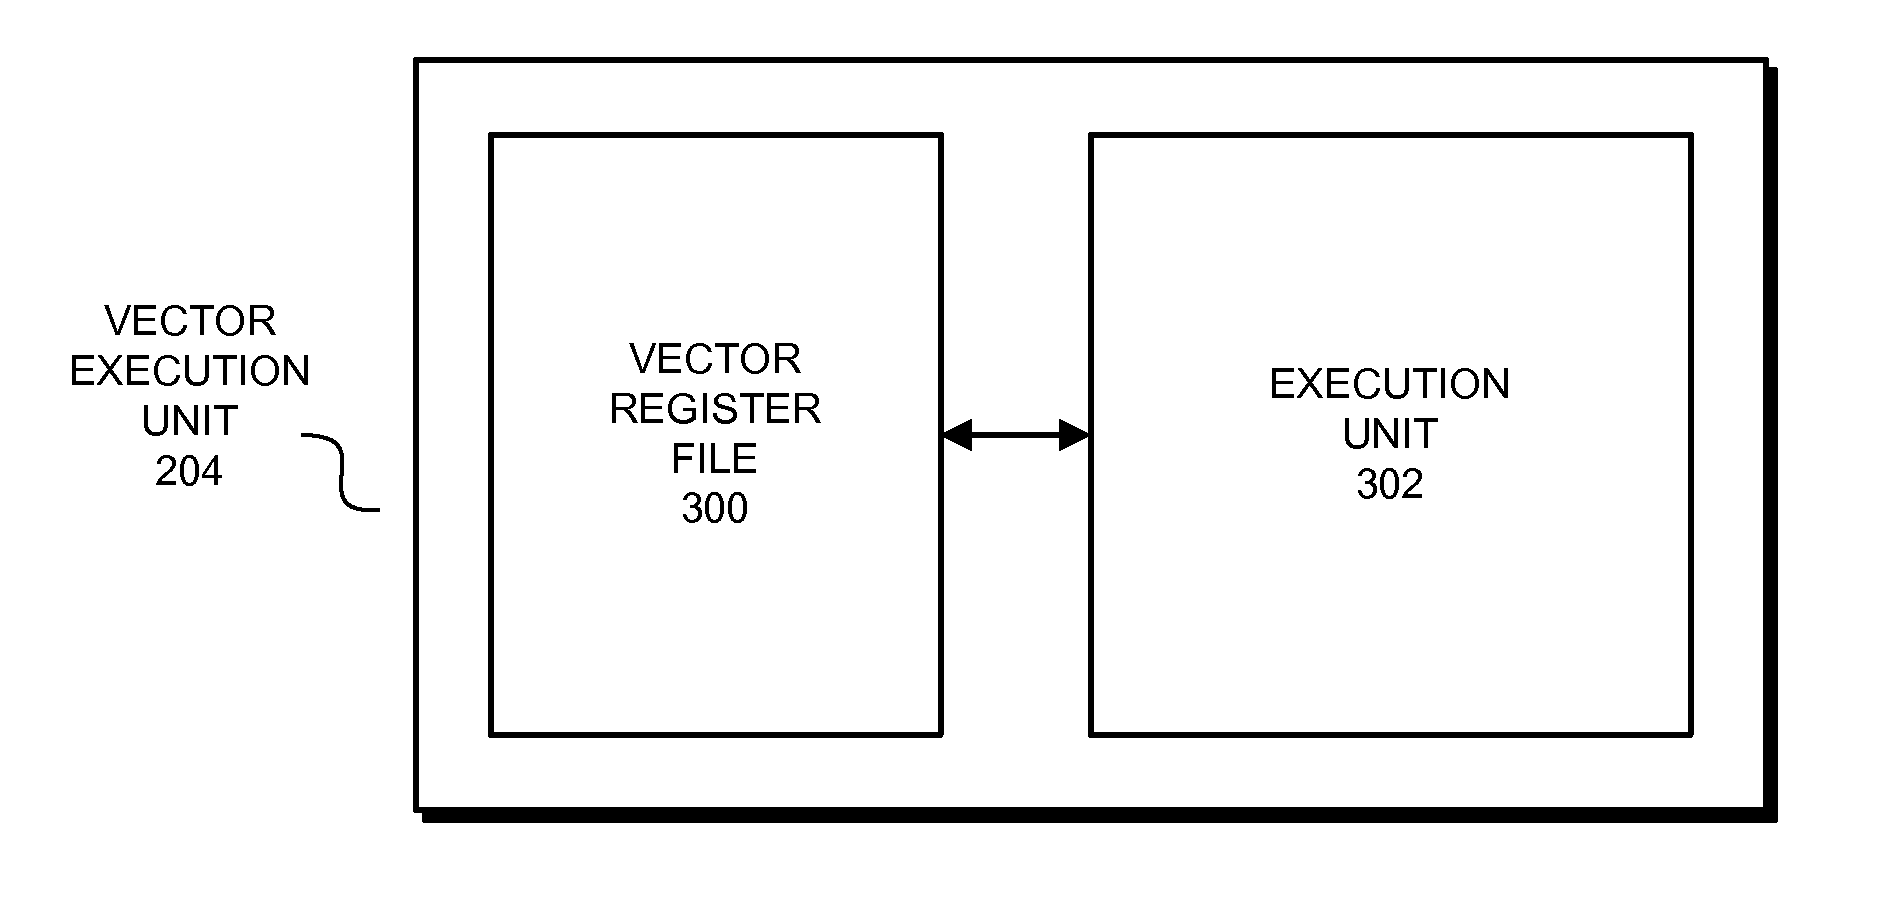 Select first and select last instructions for processing vectors